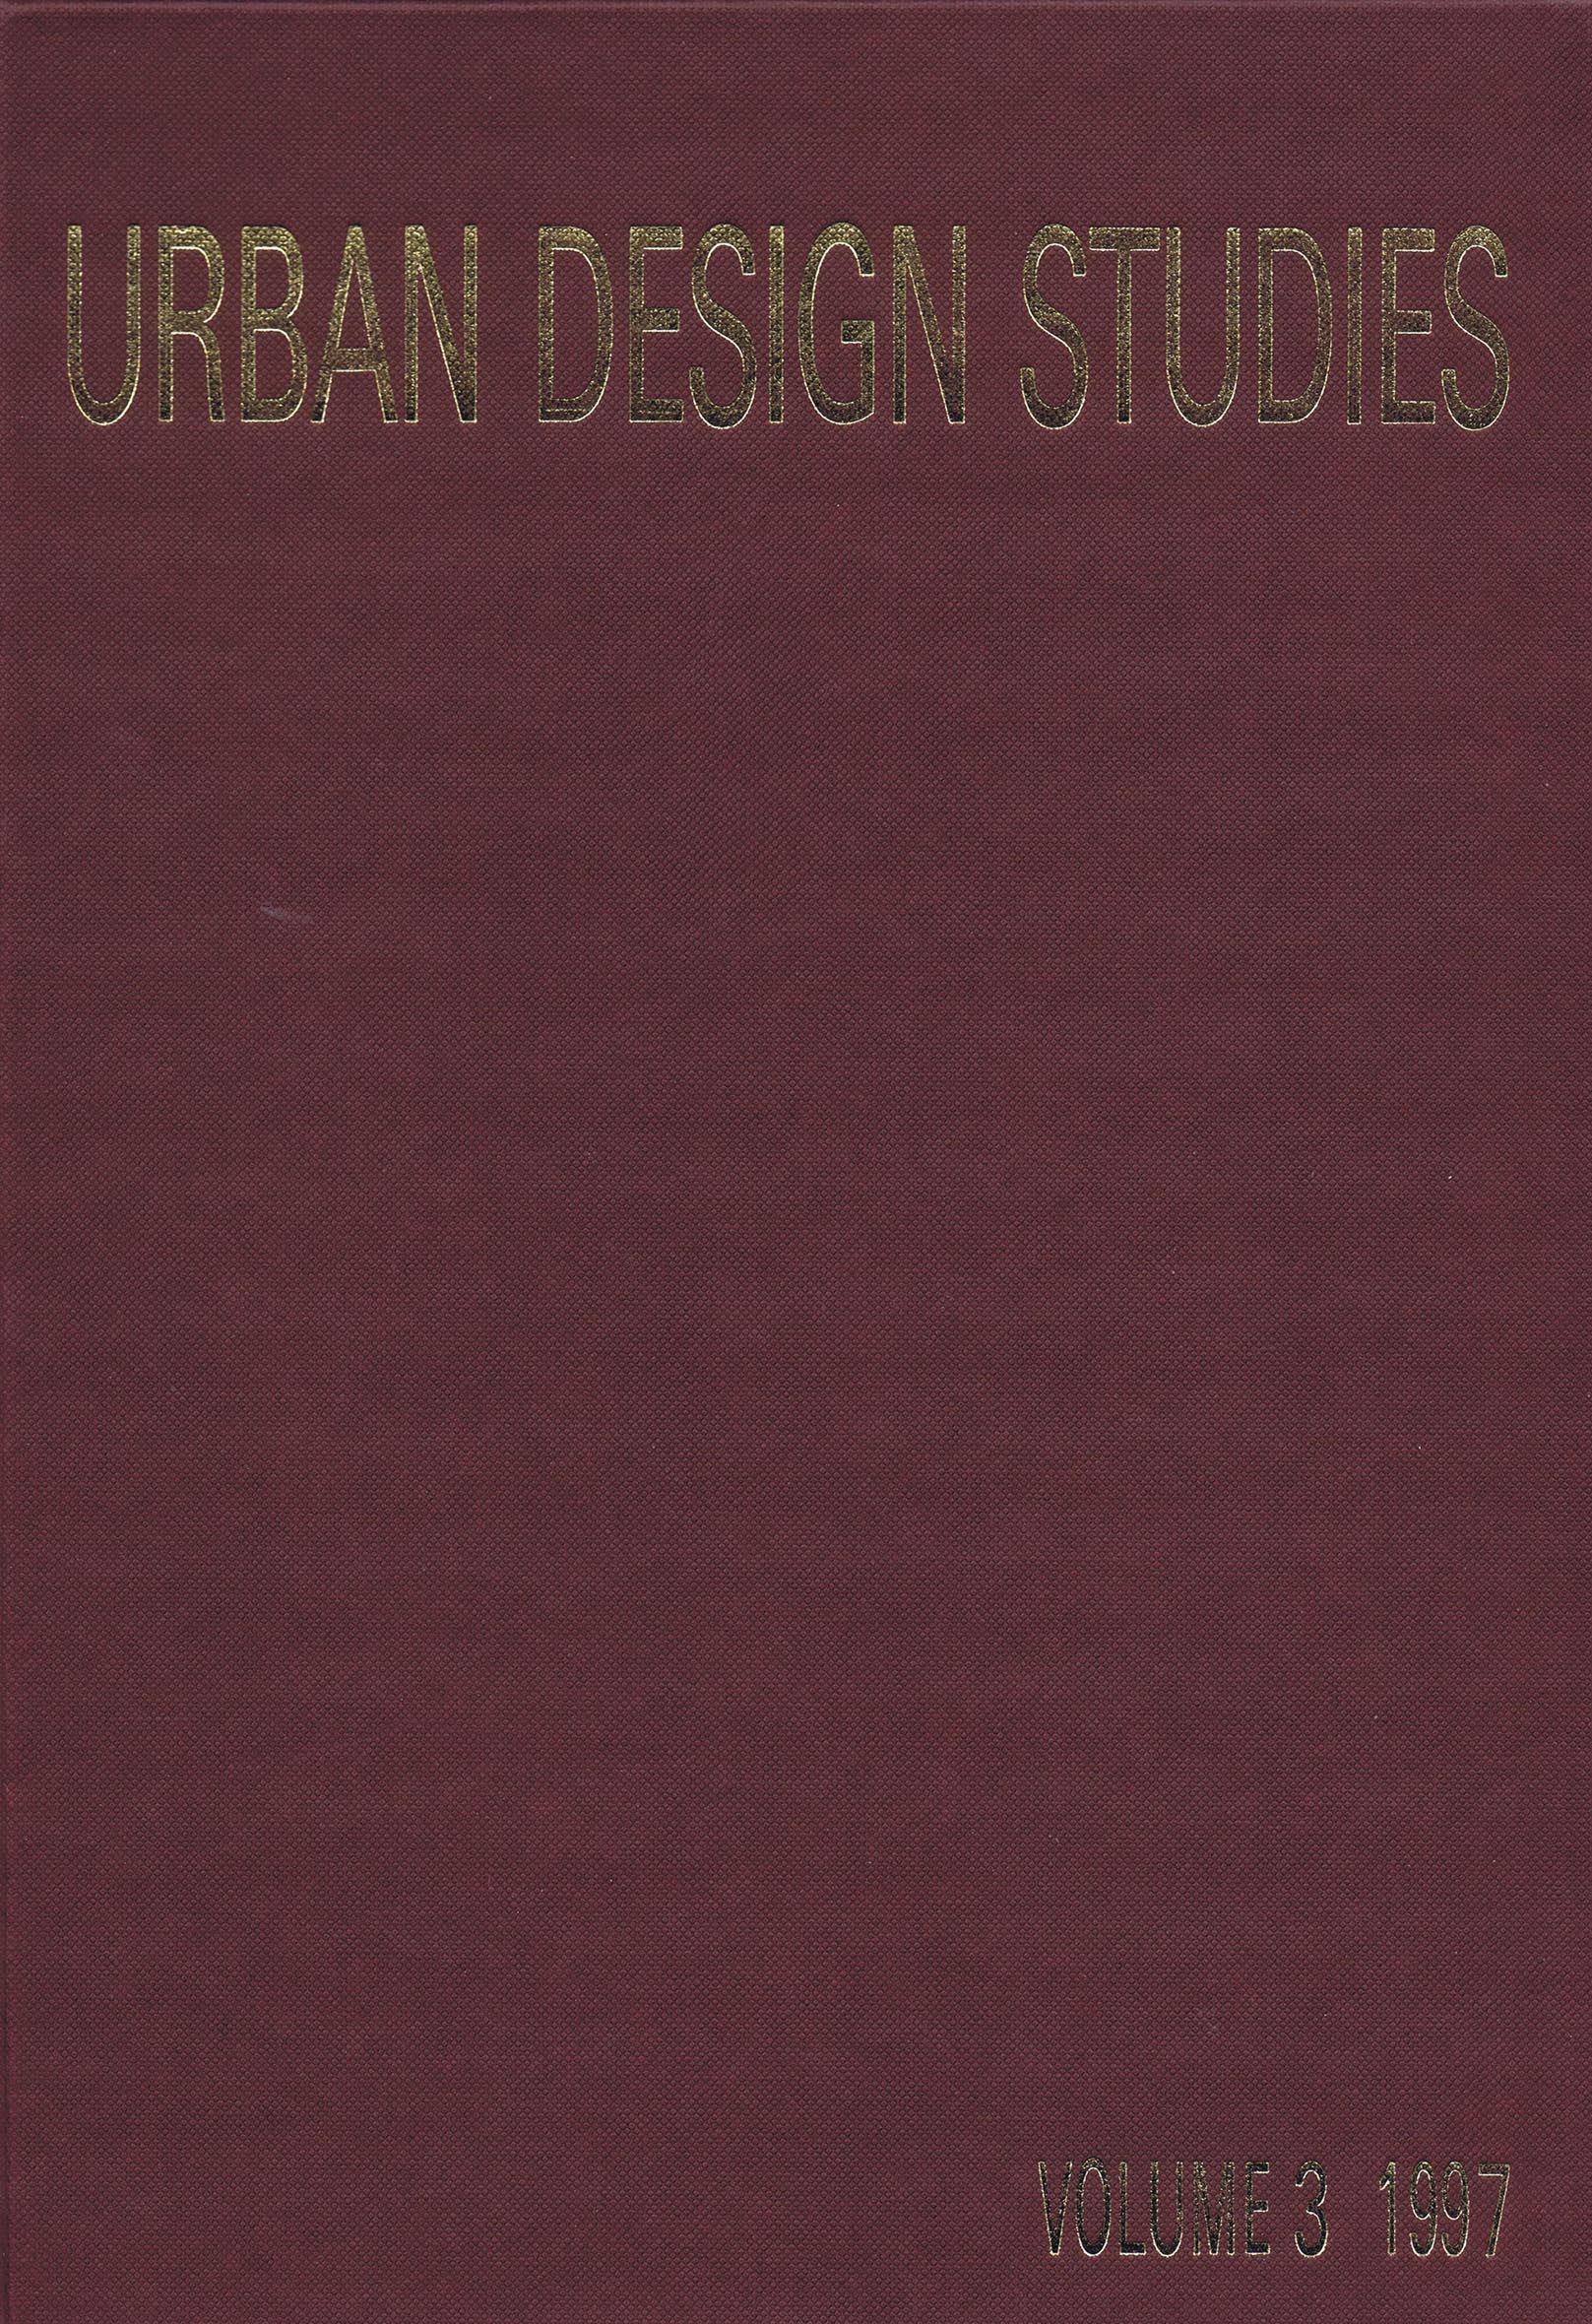 01_UDS_3_front_cover